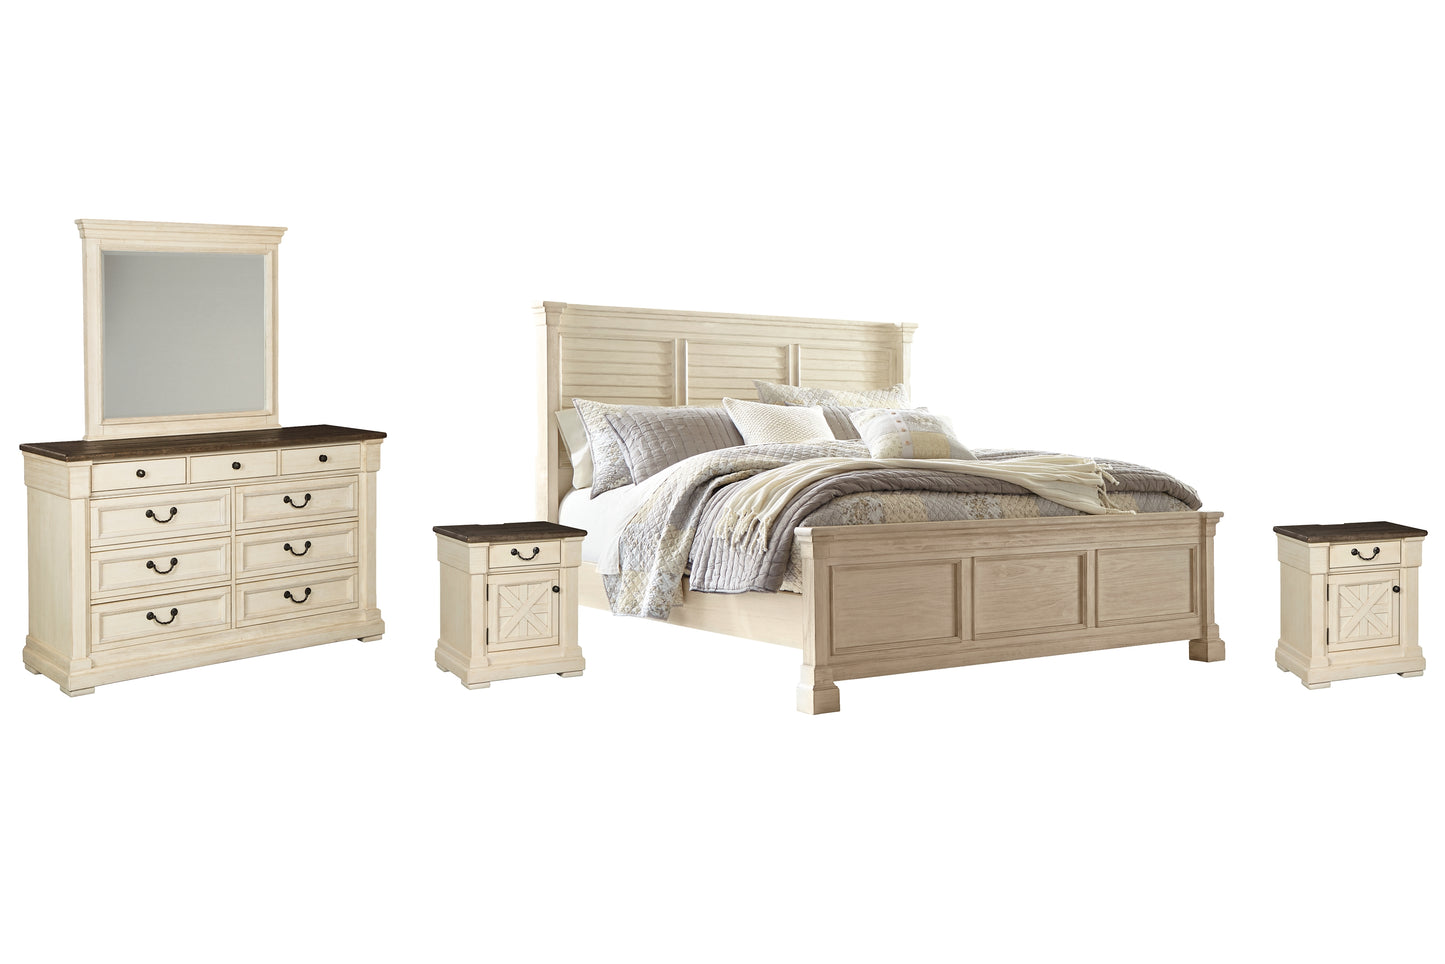 Bolanburg King Panel Bed with Mirrored Dresser and 2 Nightstands Wilson Furniture (OH)  in Bridgeport, Ohio. Serving Bridgeport, Yorkville, Bellaire, & Avondale